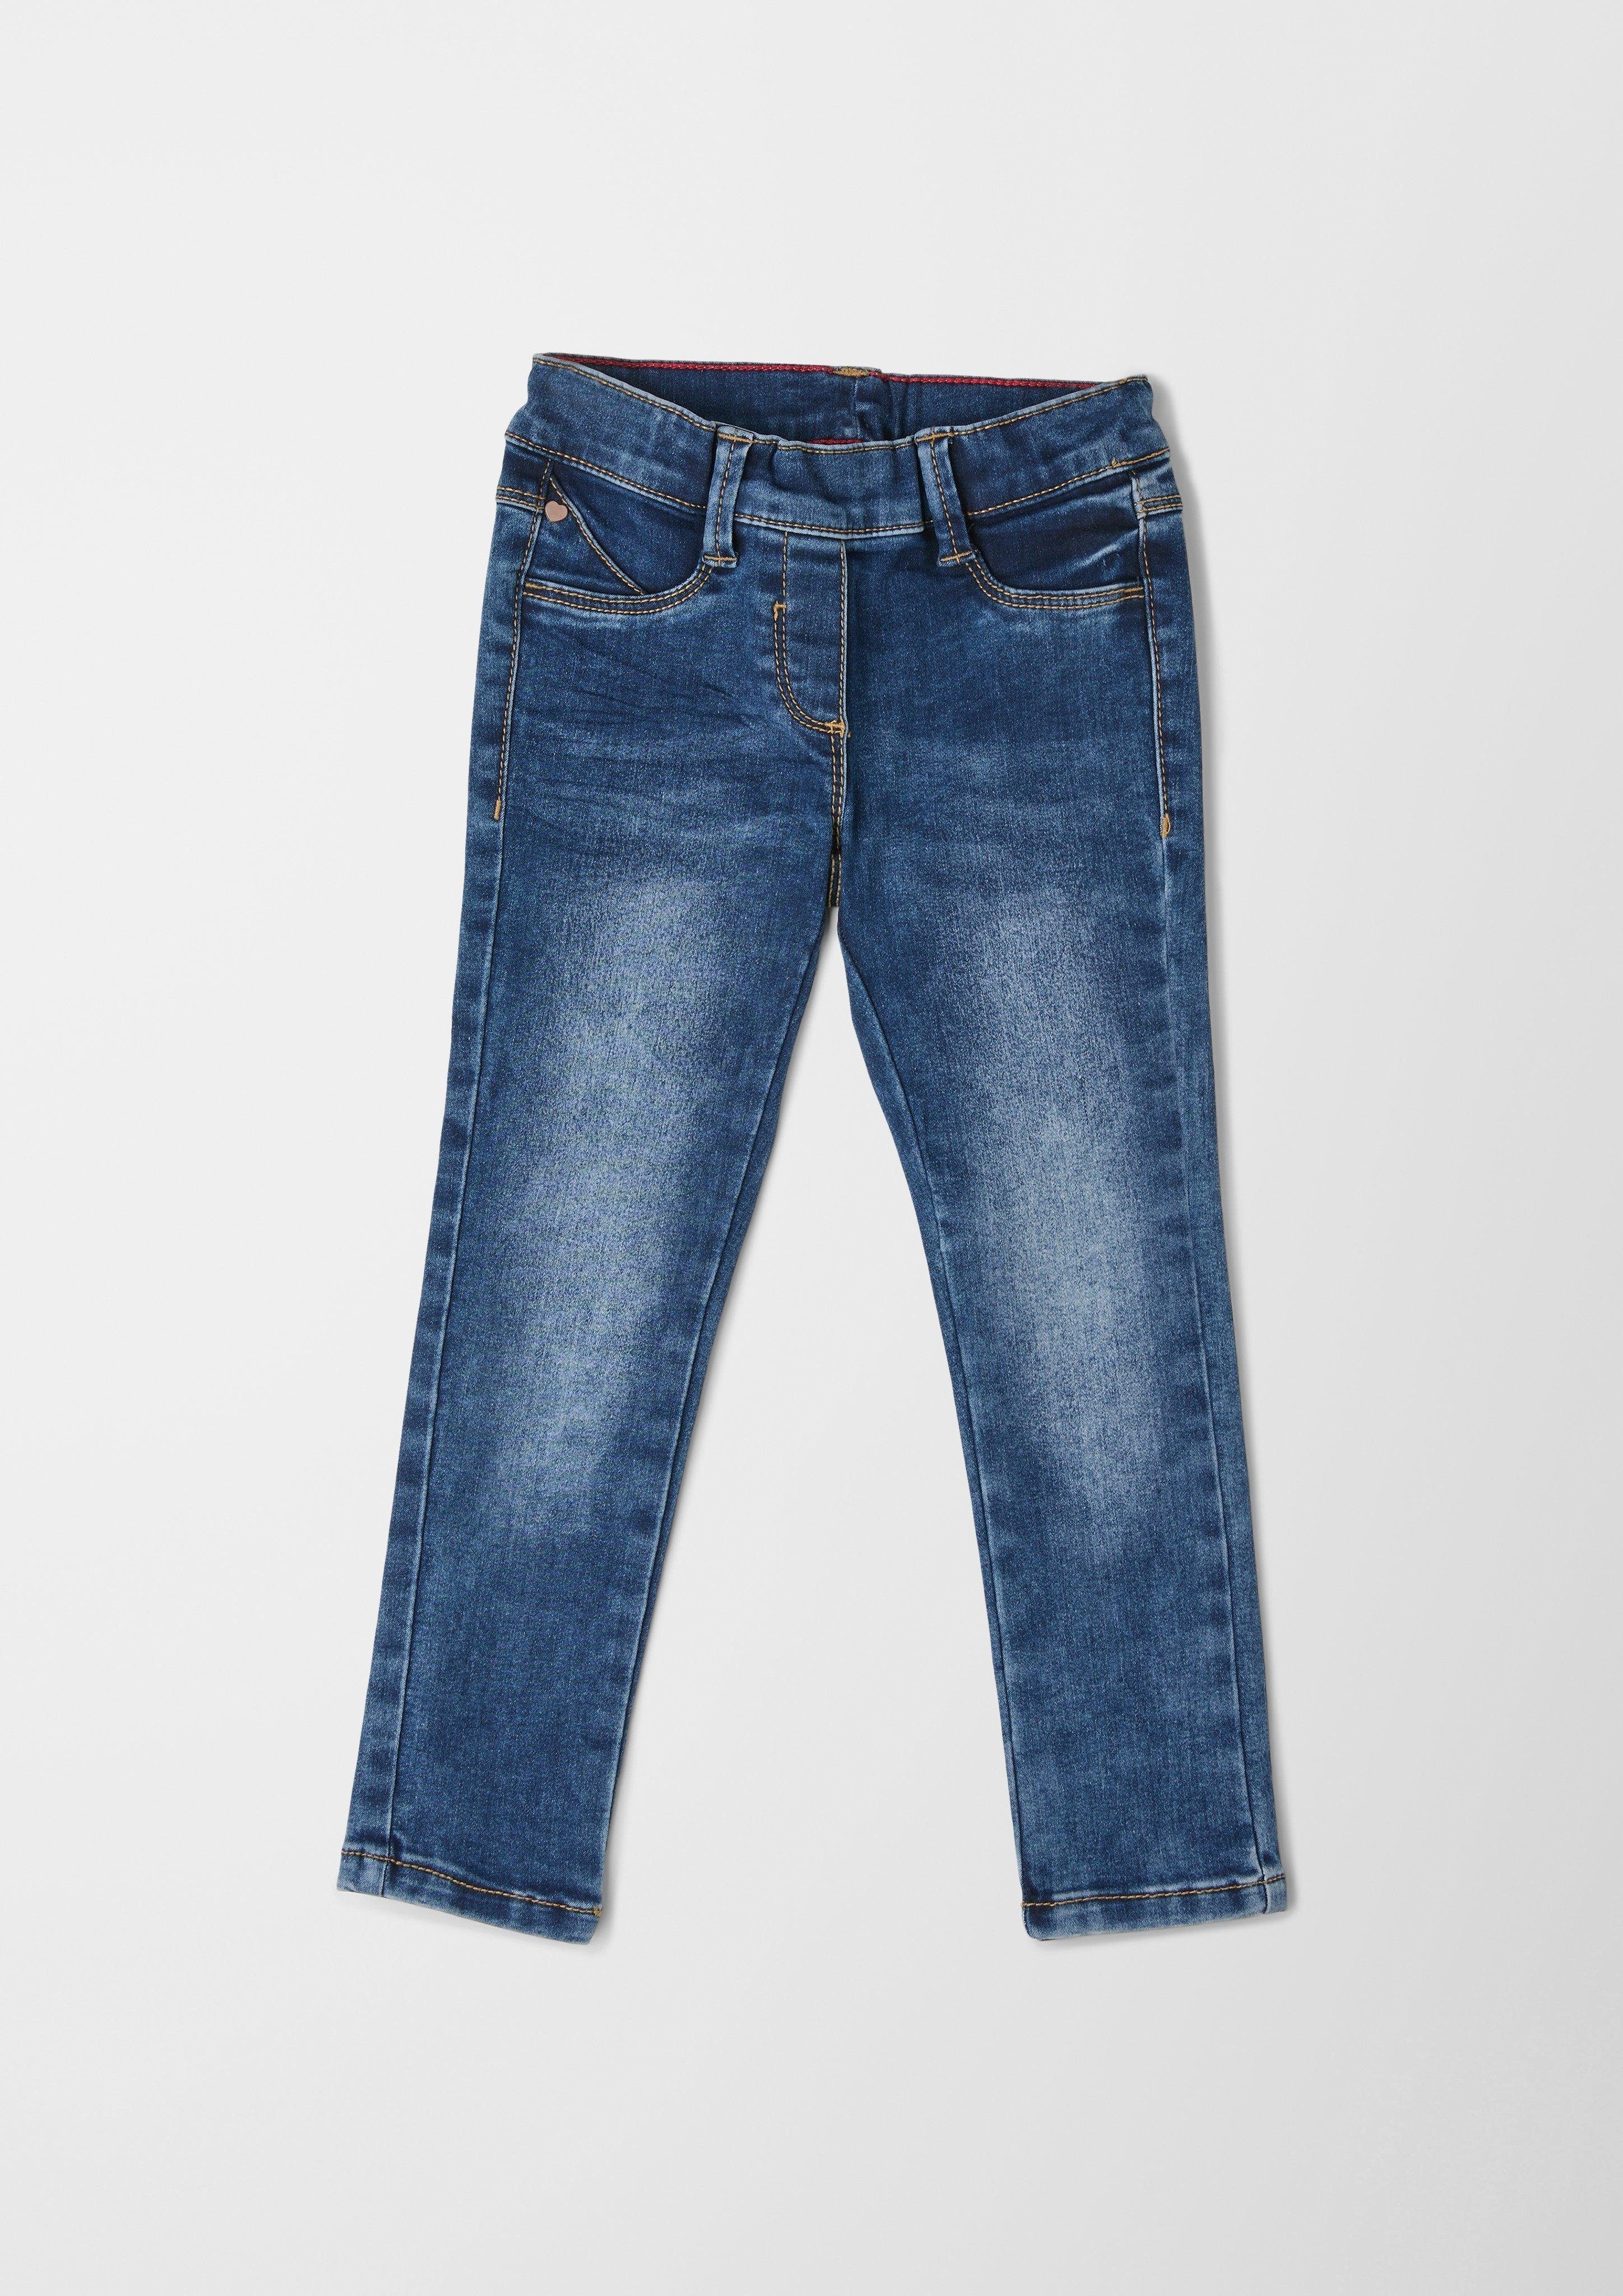 Rise / High s.Oliver Mid 5-Pocket-Jeans / Rise Jeans Fit Skinny Skinny / Waschung Treggings / Leg